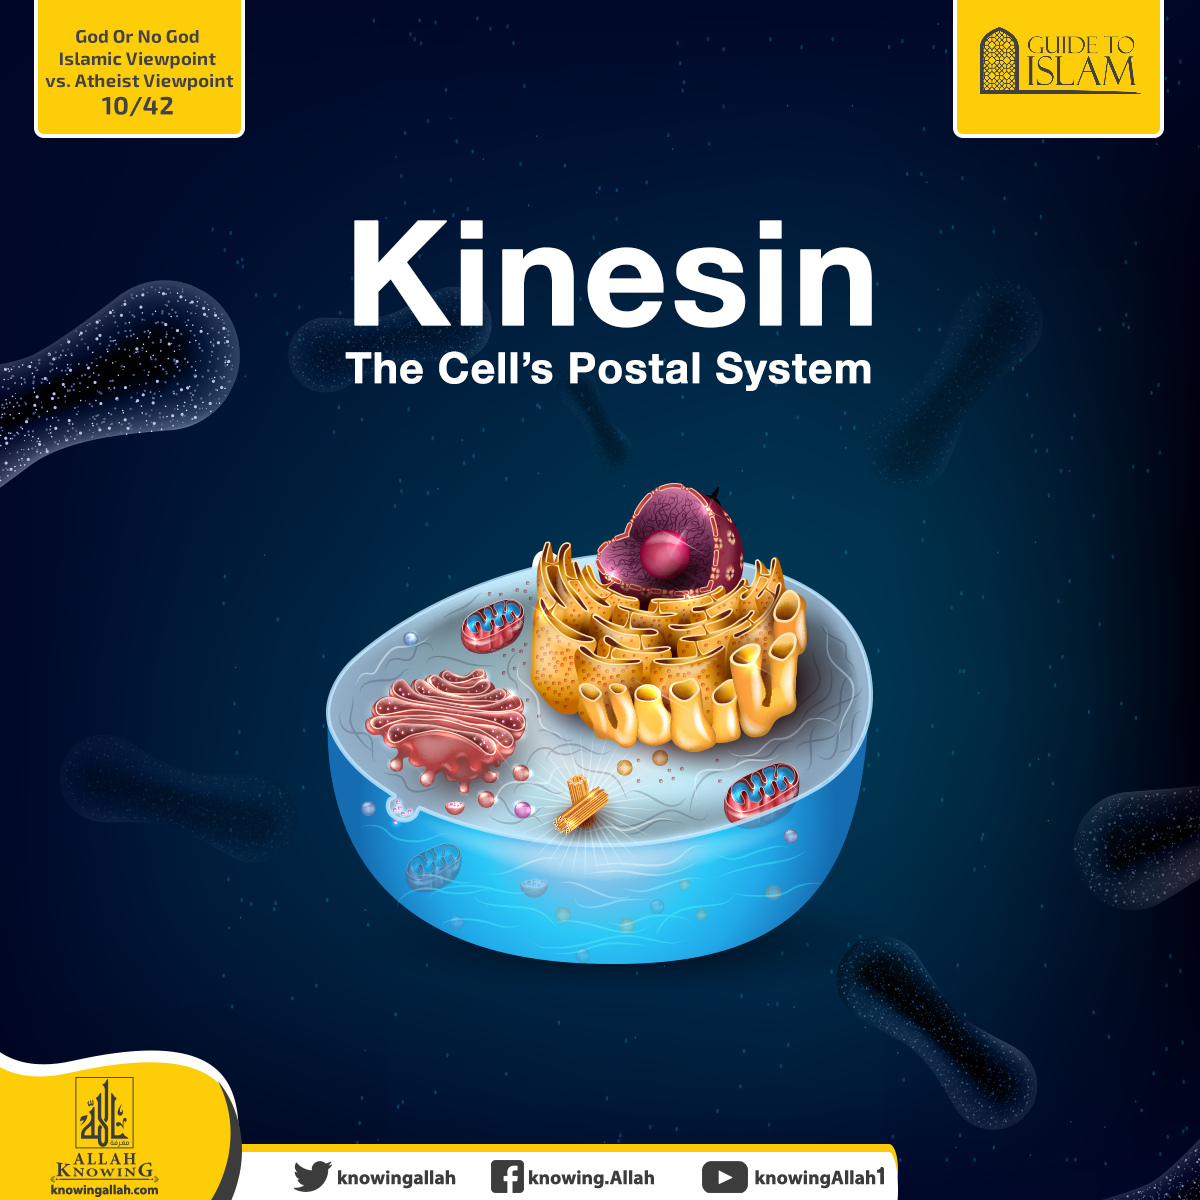 Kinesin...The Cell’s Postal System